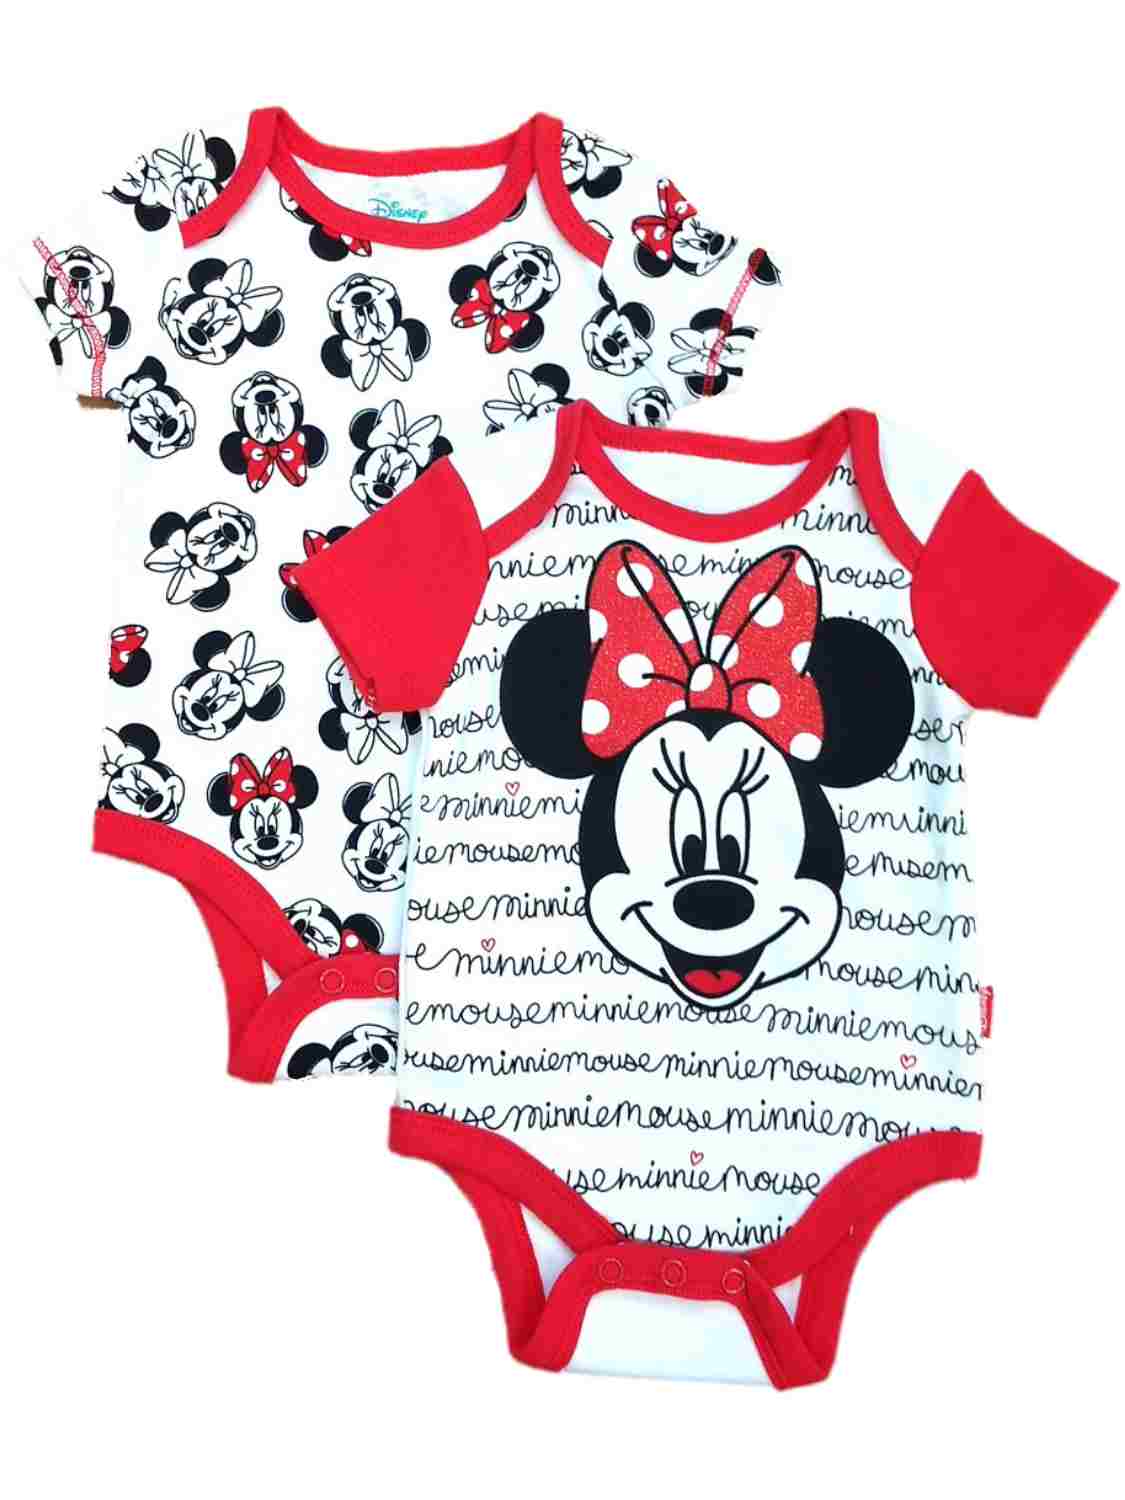 Disney Infant Girls 2pc Minnie Mouse Bodysuit Set Red Glitter Baby Outfit